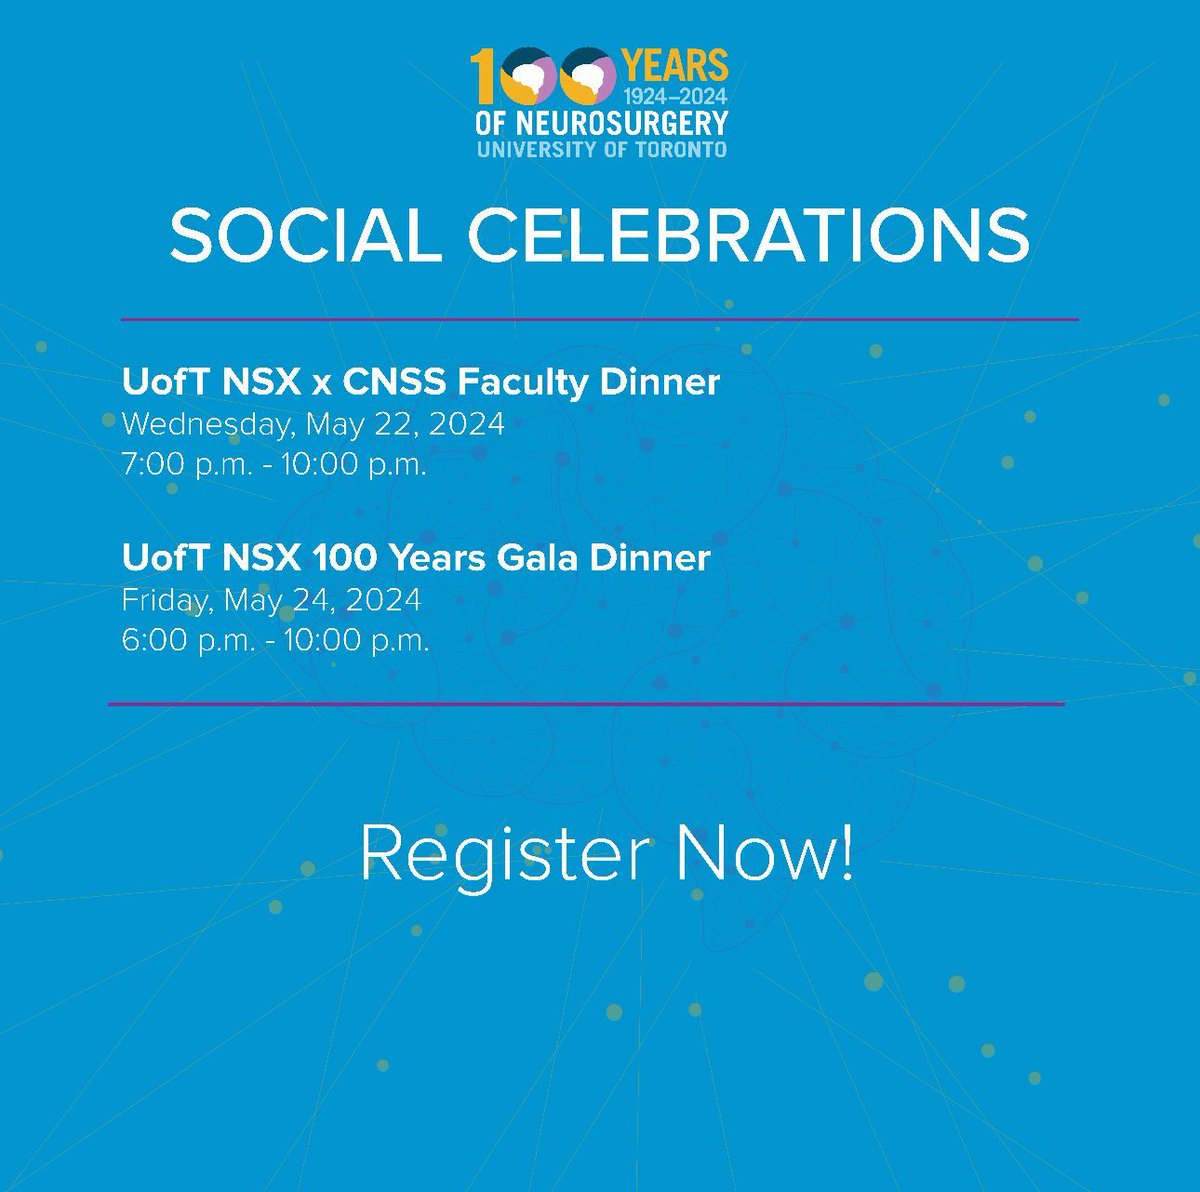 Just one week until we begin the #courses, #scientific celebrations, and #social events to celebrate the #100th anniversary of @UofT #Neurosurgery! Don’t miss out - there’s still time to register: bit.ly/3PihHdP @CNSFNeuroLinks @ICOMeningioma @gelarehzadeh